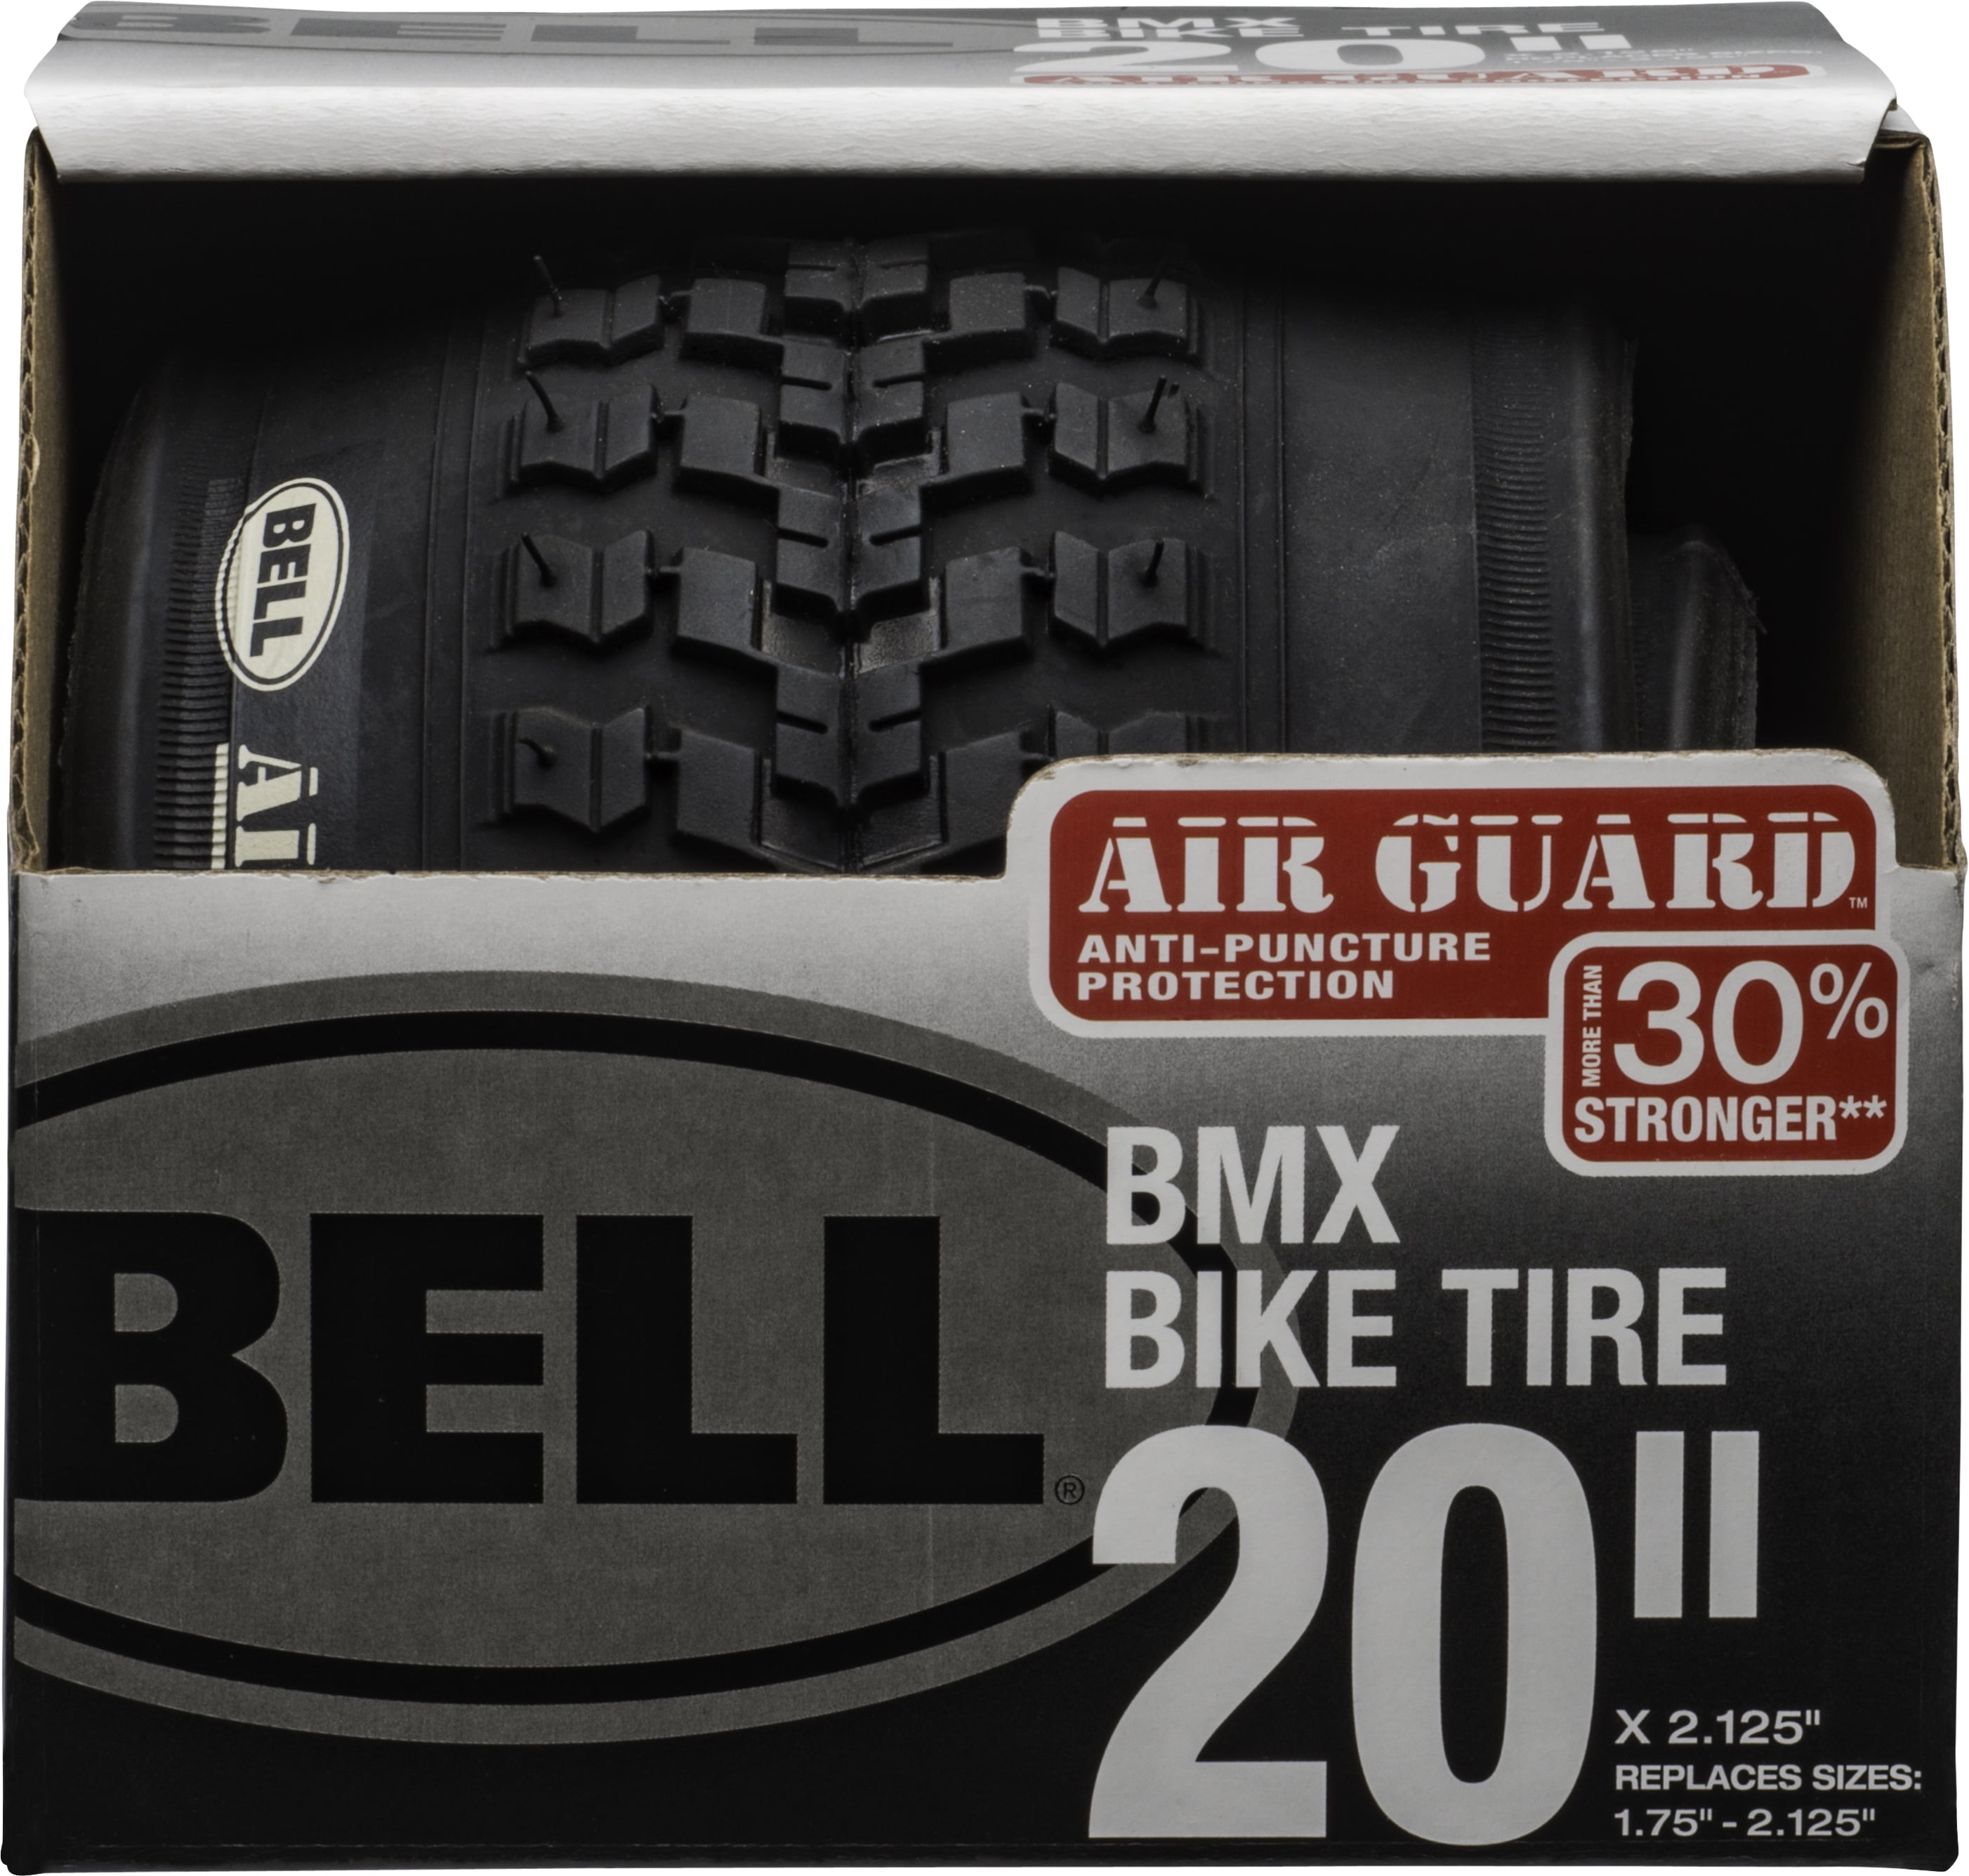 NEW BELL BMX BIKE TIRE 20" X 2.125" FLAT DEFENSE ANTI-PUNCTURE PROTECTION 1 